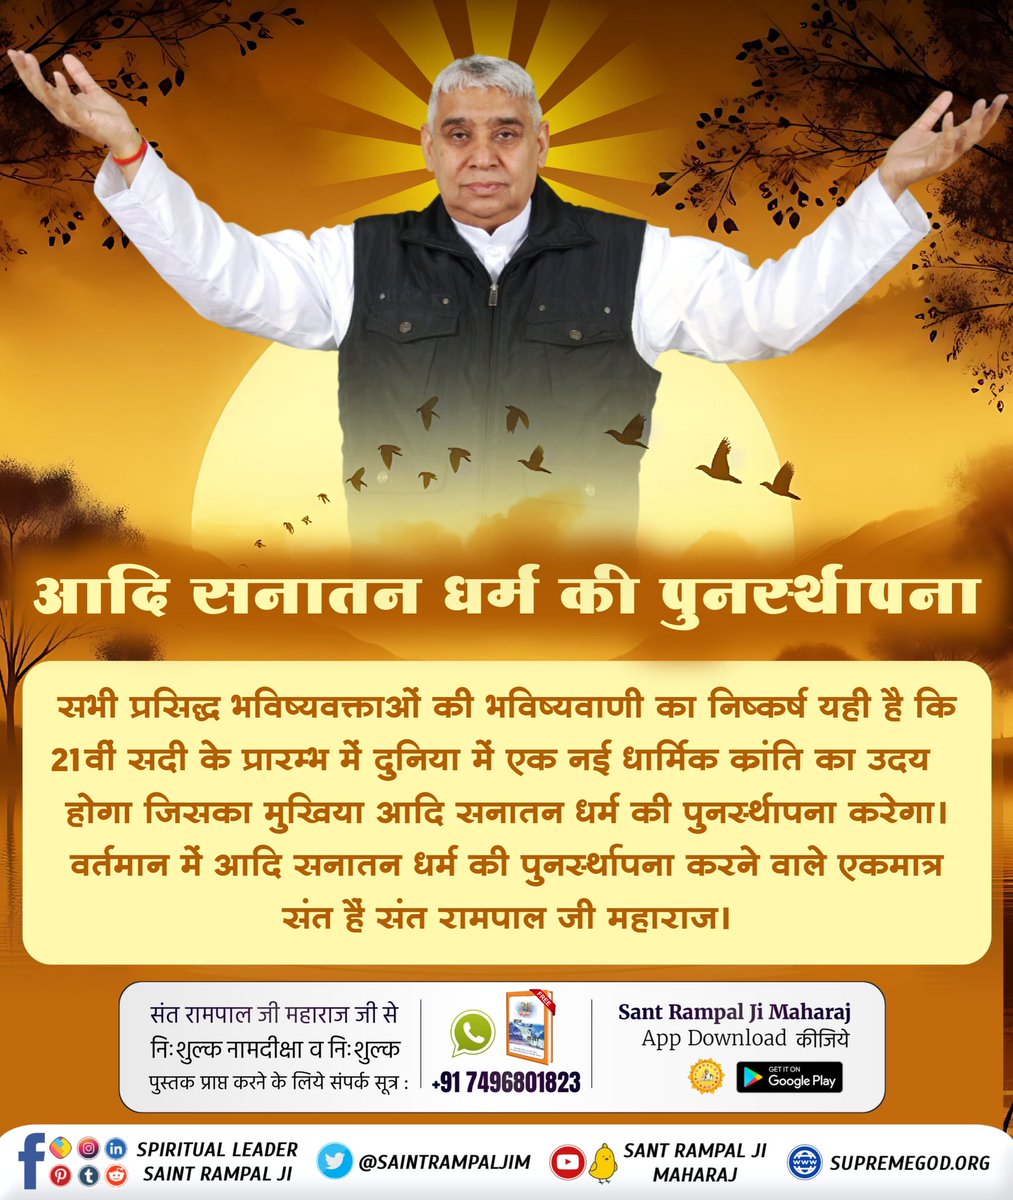 #आदि_सनातनधर्म_होगाप्रतिष्ठित
Restoration of the original Sanatan Dharma

The conclusion of the predictions of all the famous prophets is that in the beginning of the 21st century, a new religious revolution will emerge in the world whose leader will restore Adi Sanatan Dharma.